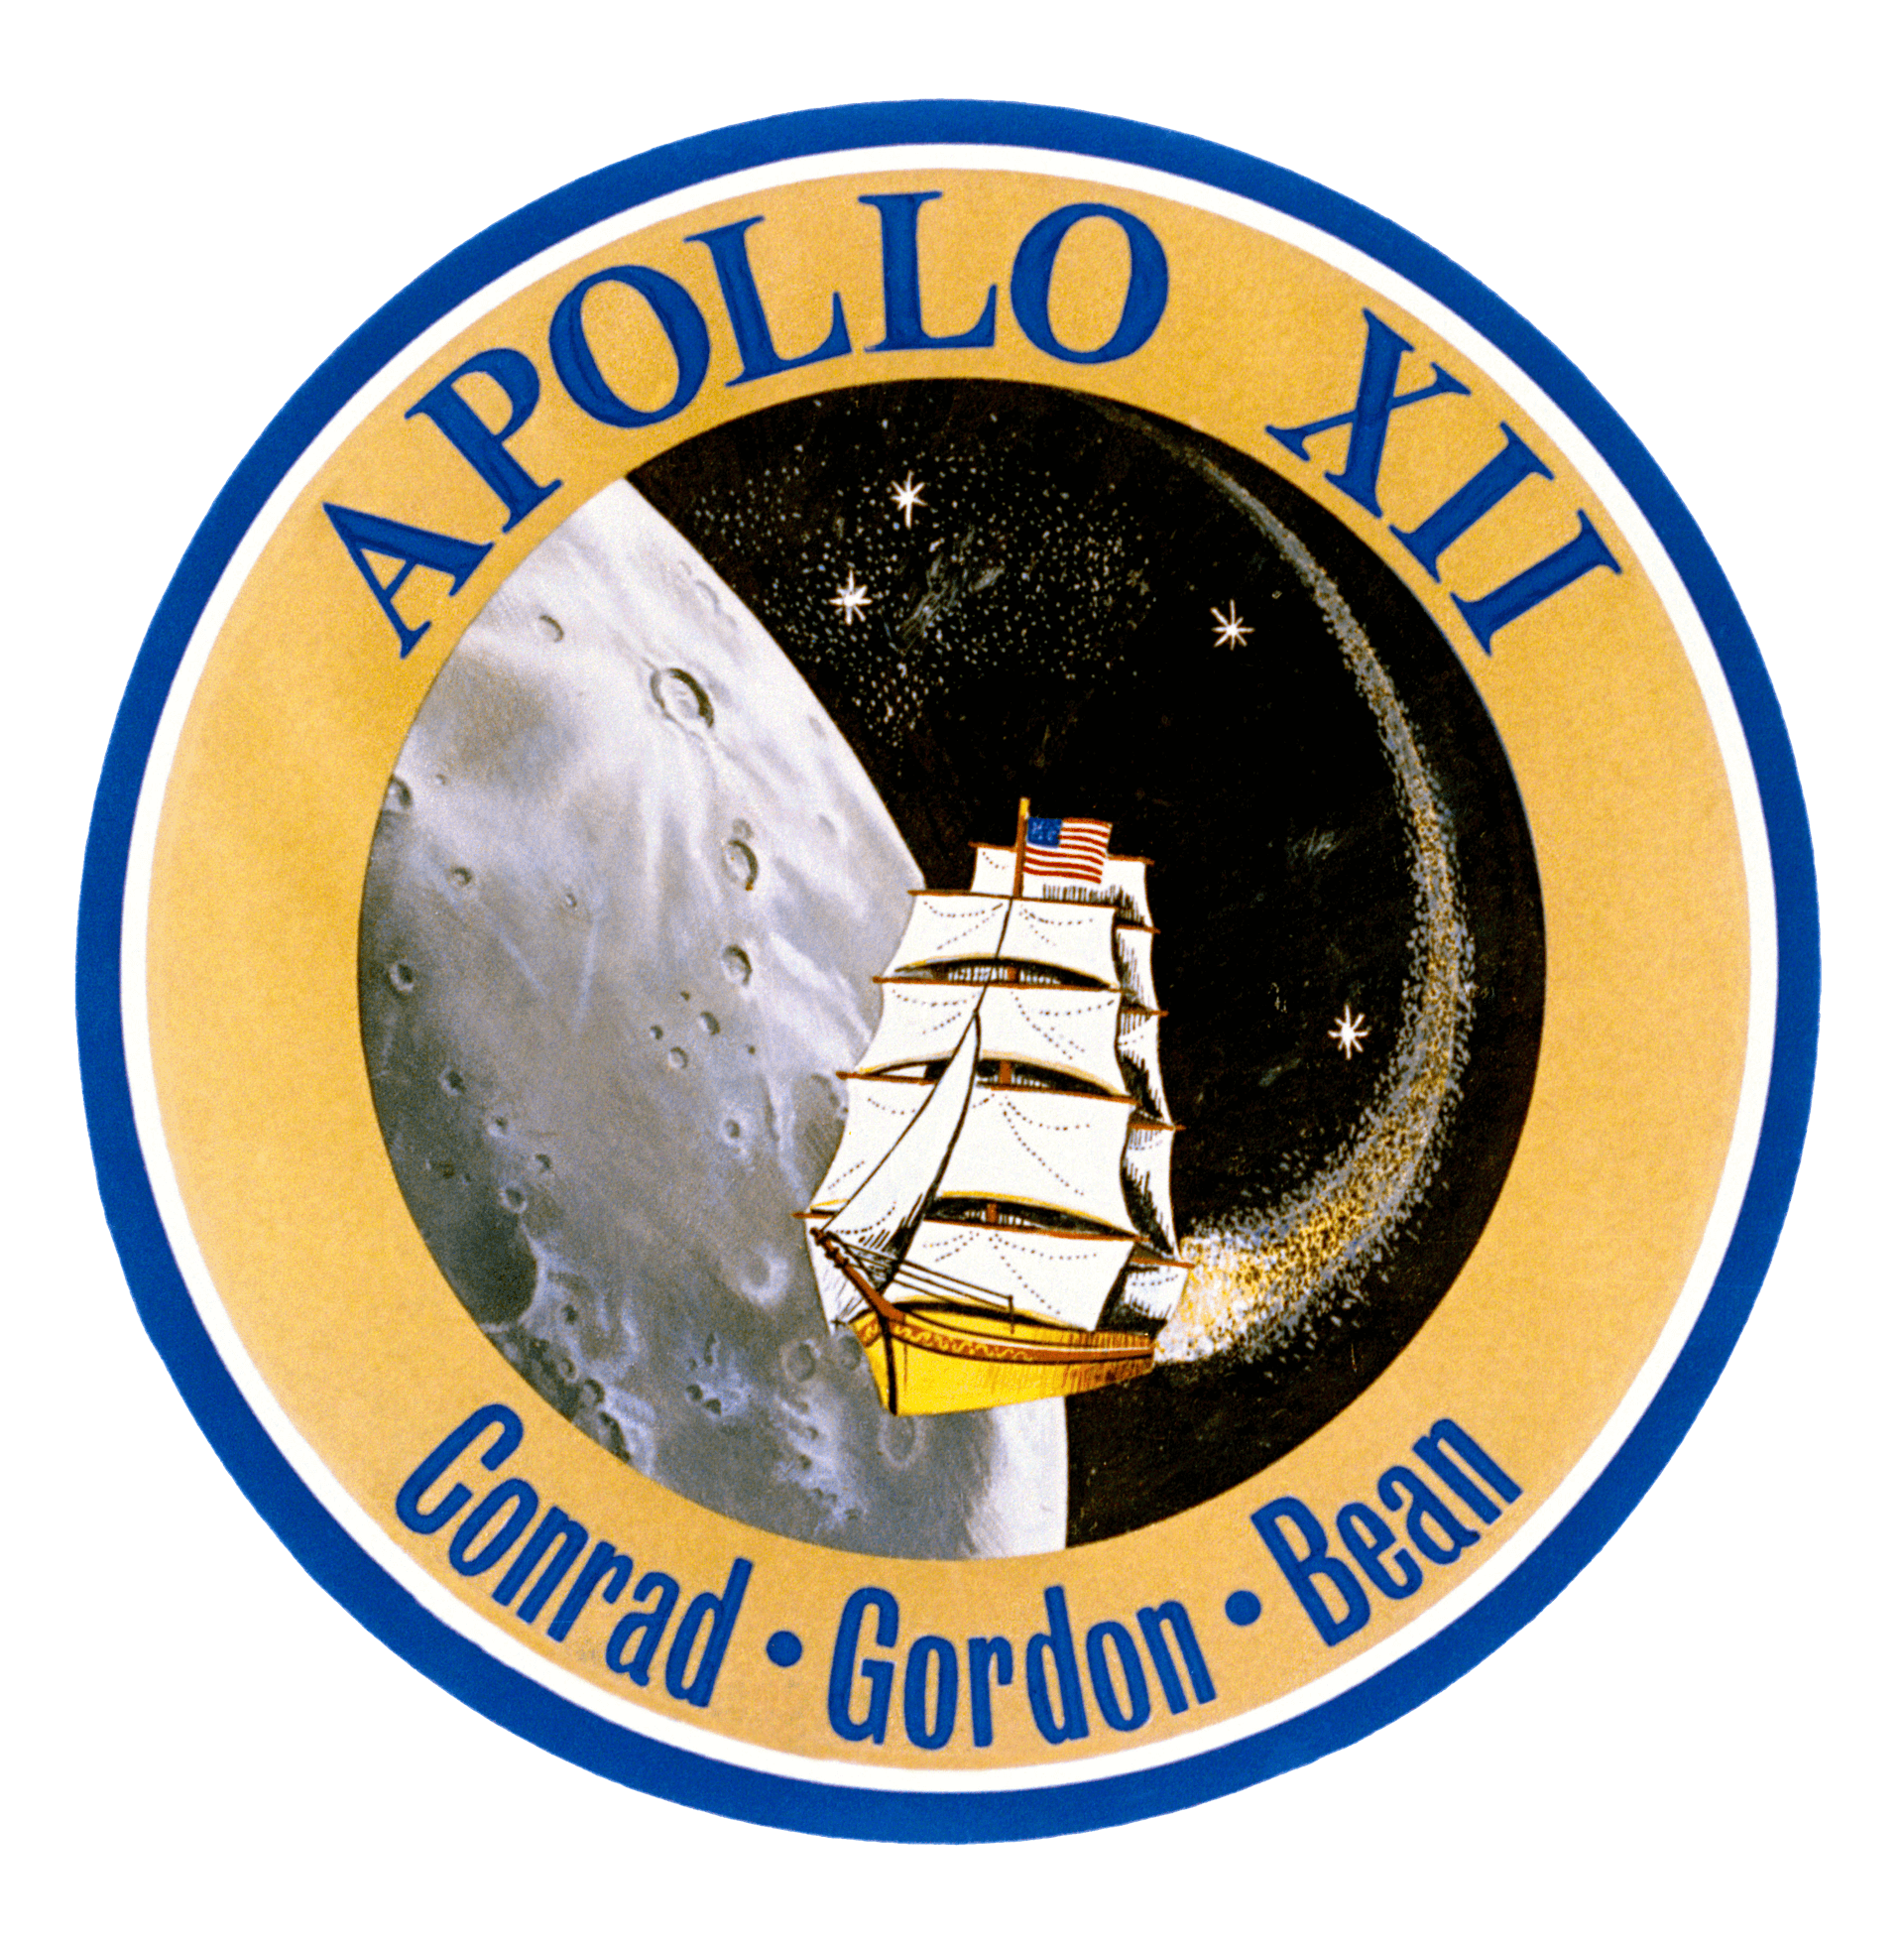 Mission patch for Apollo 12